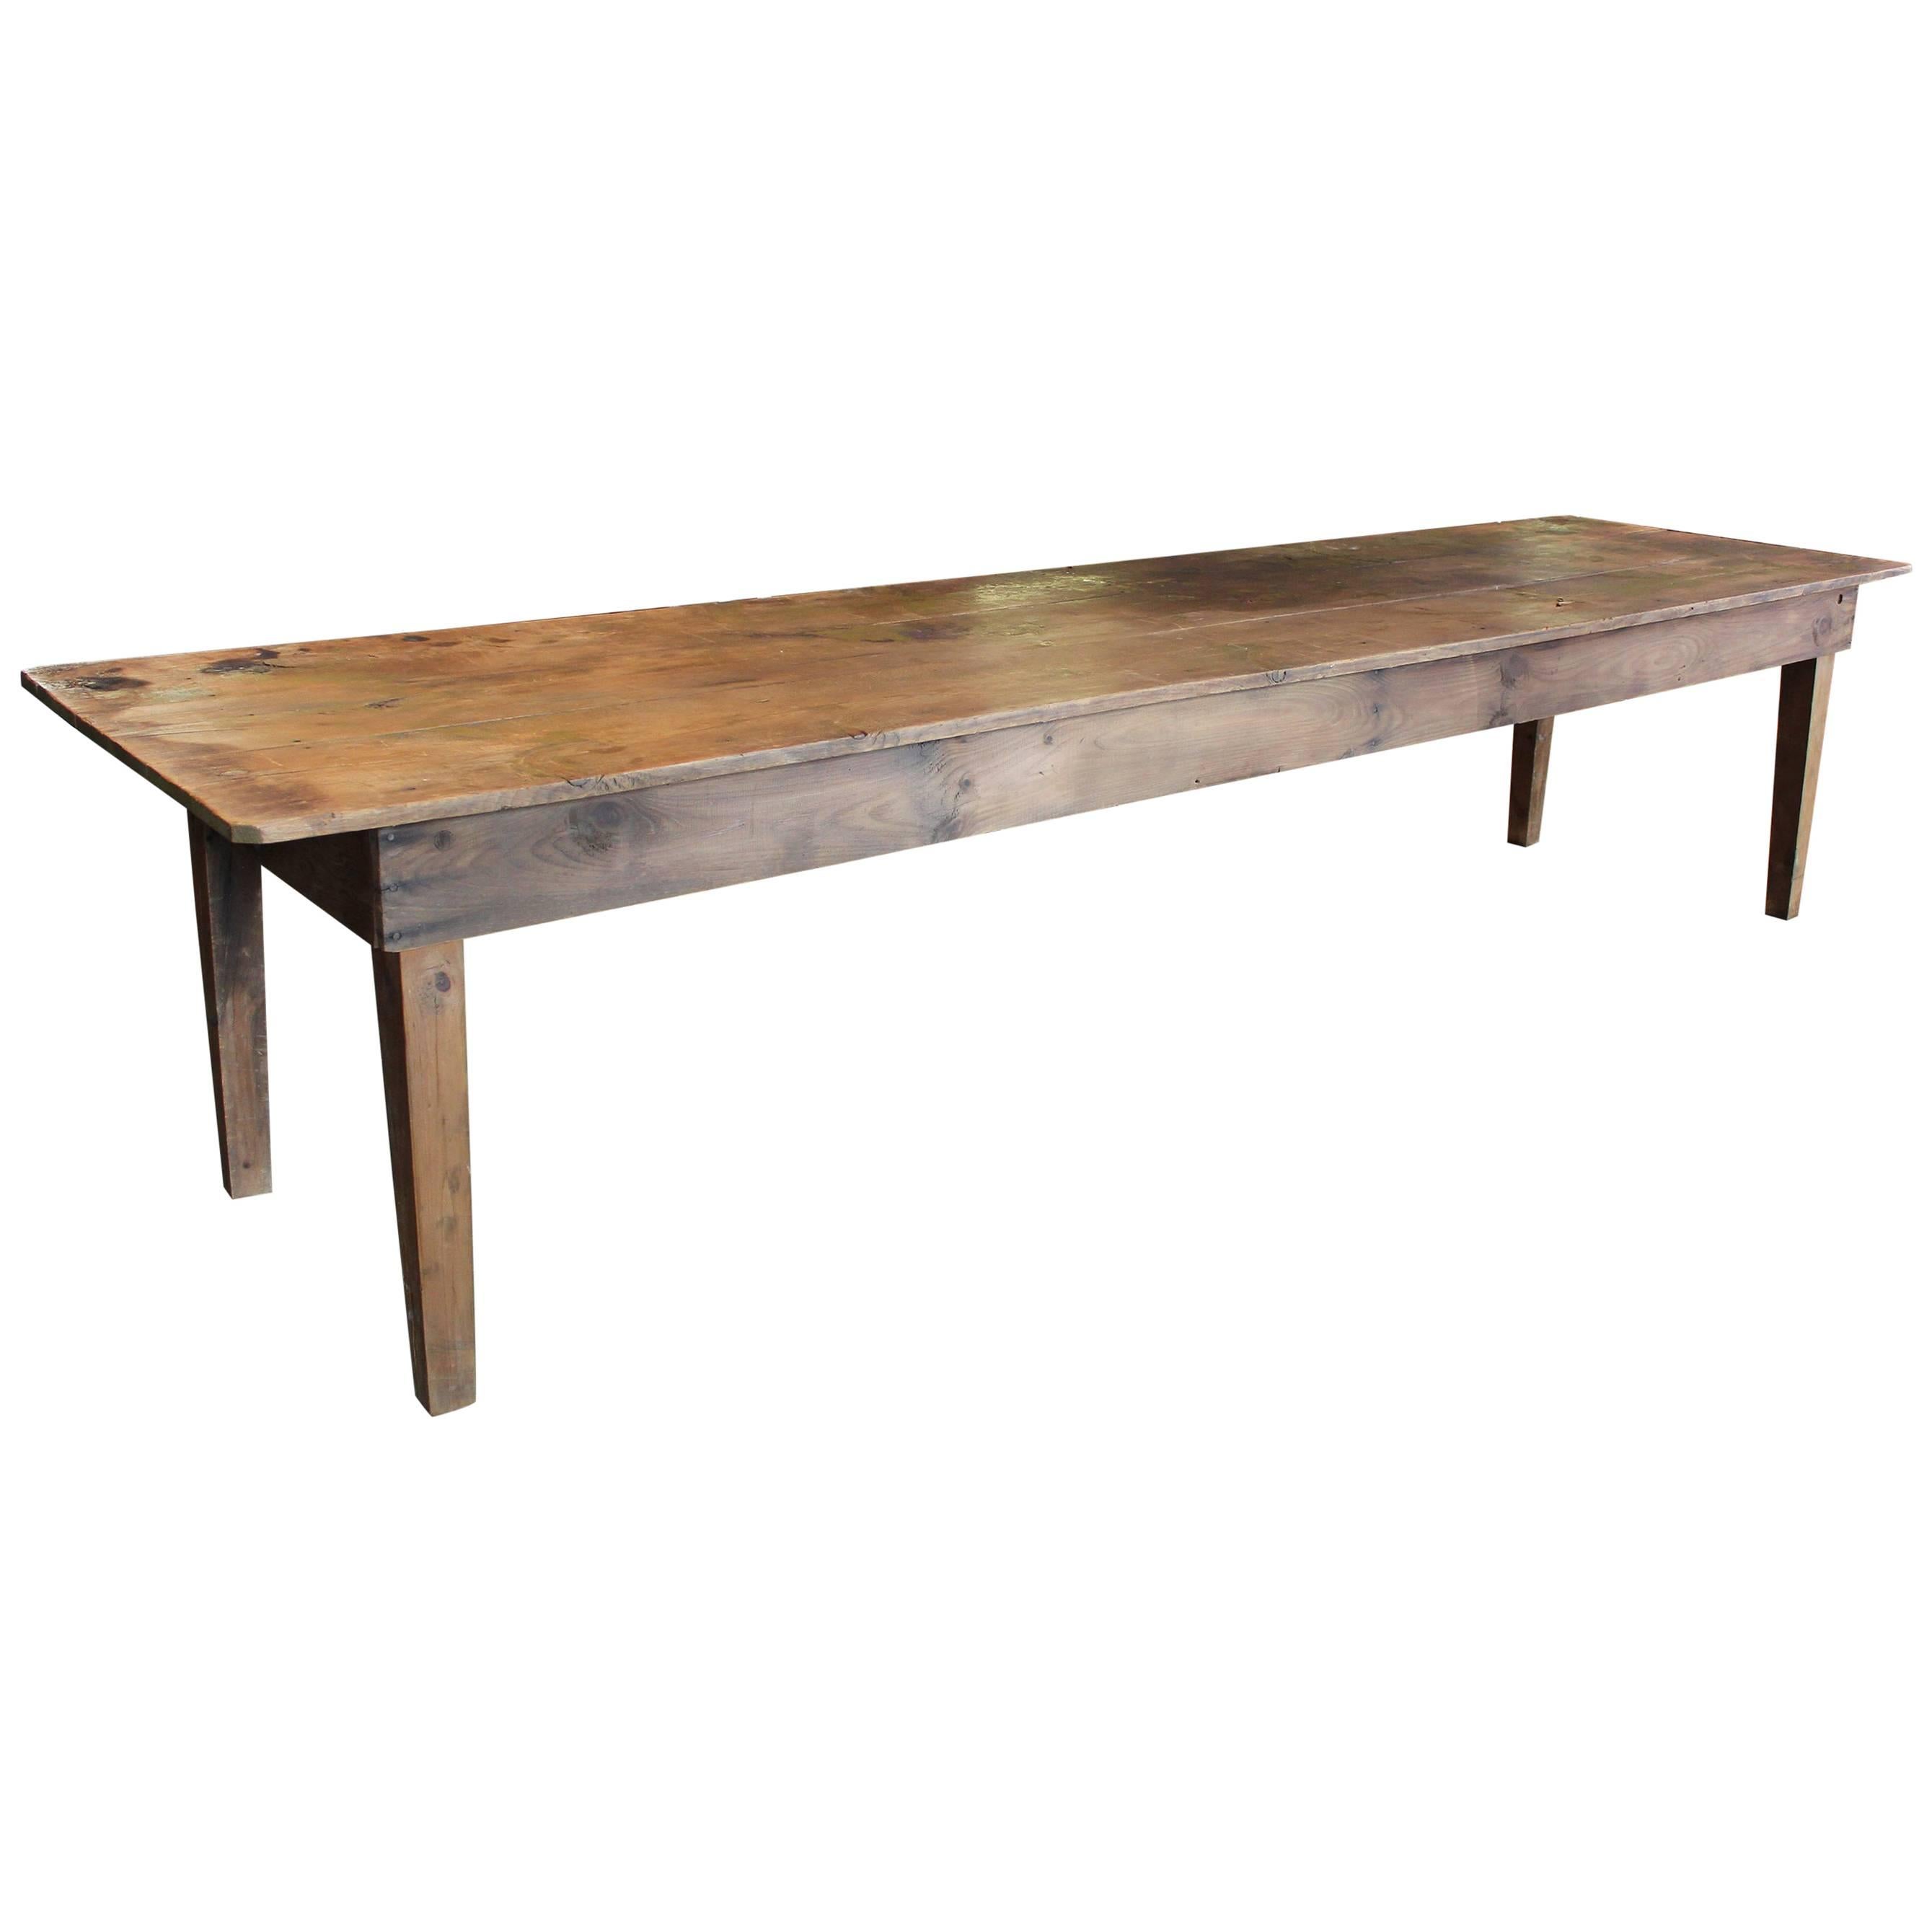 Rustic Wooden Pine Dining, Harvest, Farm Conference, Kitchen Table